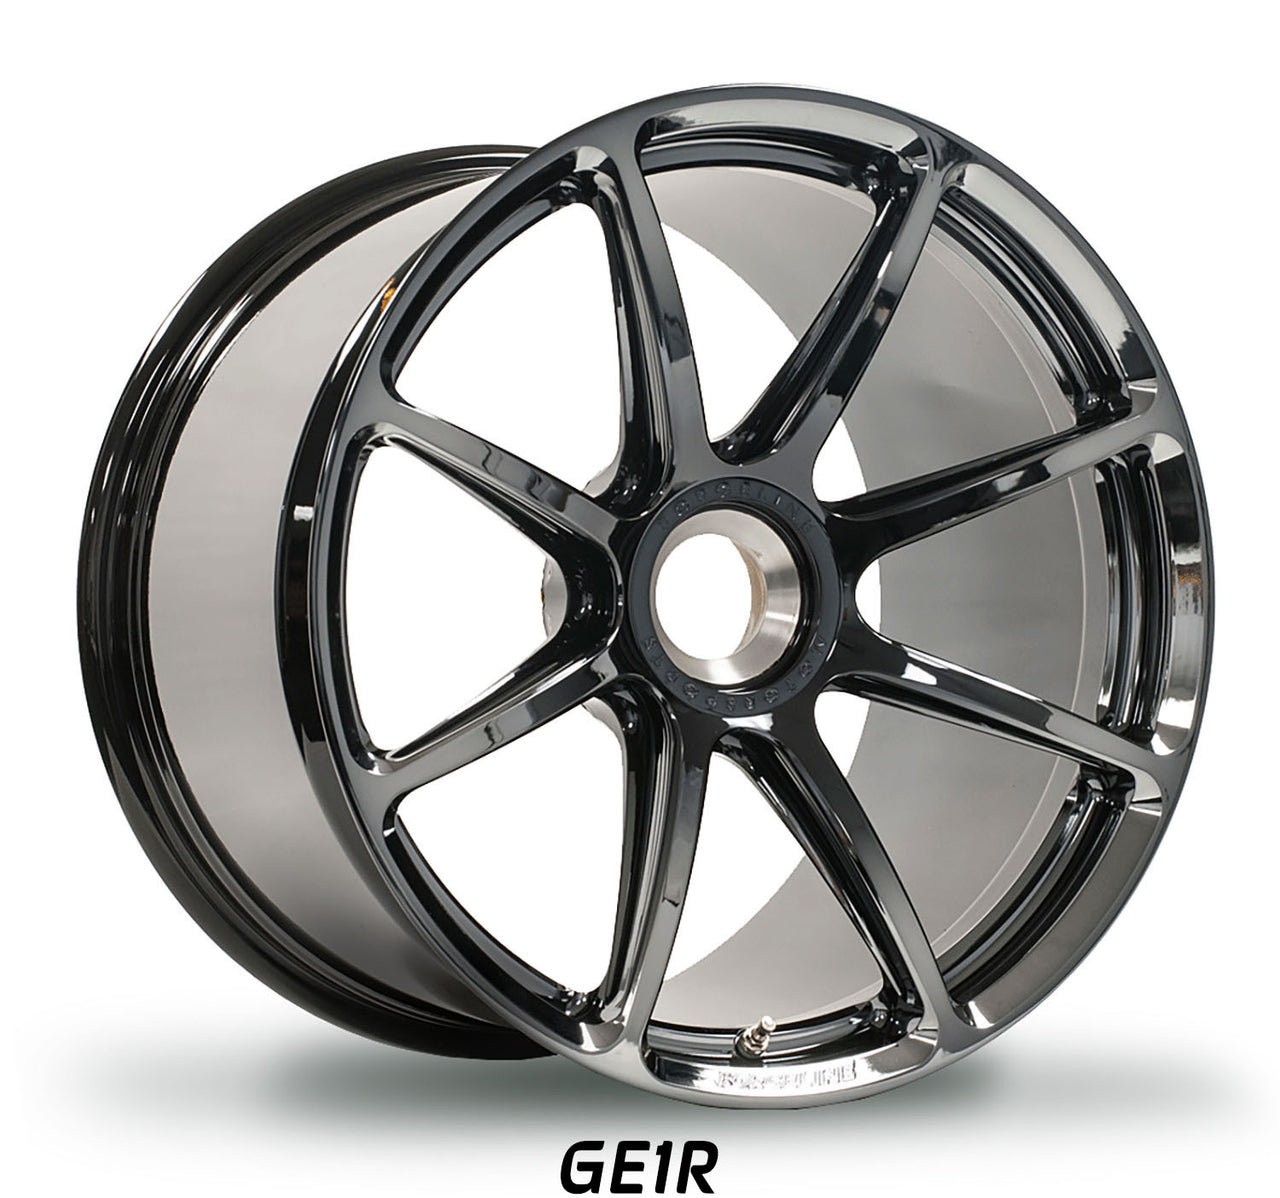 Forgeline GE1R Gloss Black center lock for Porsche 991 GT3 best forged wheels for racing and HPDE